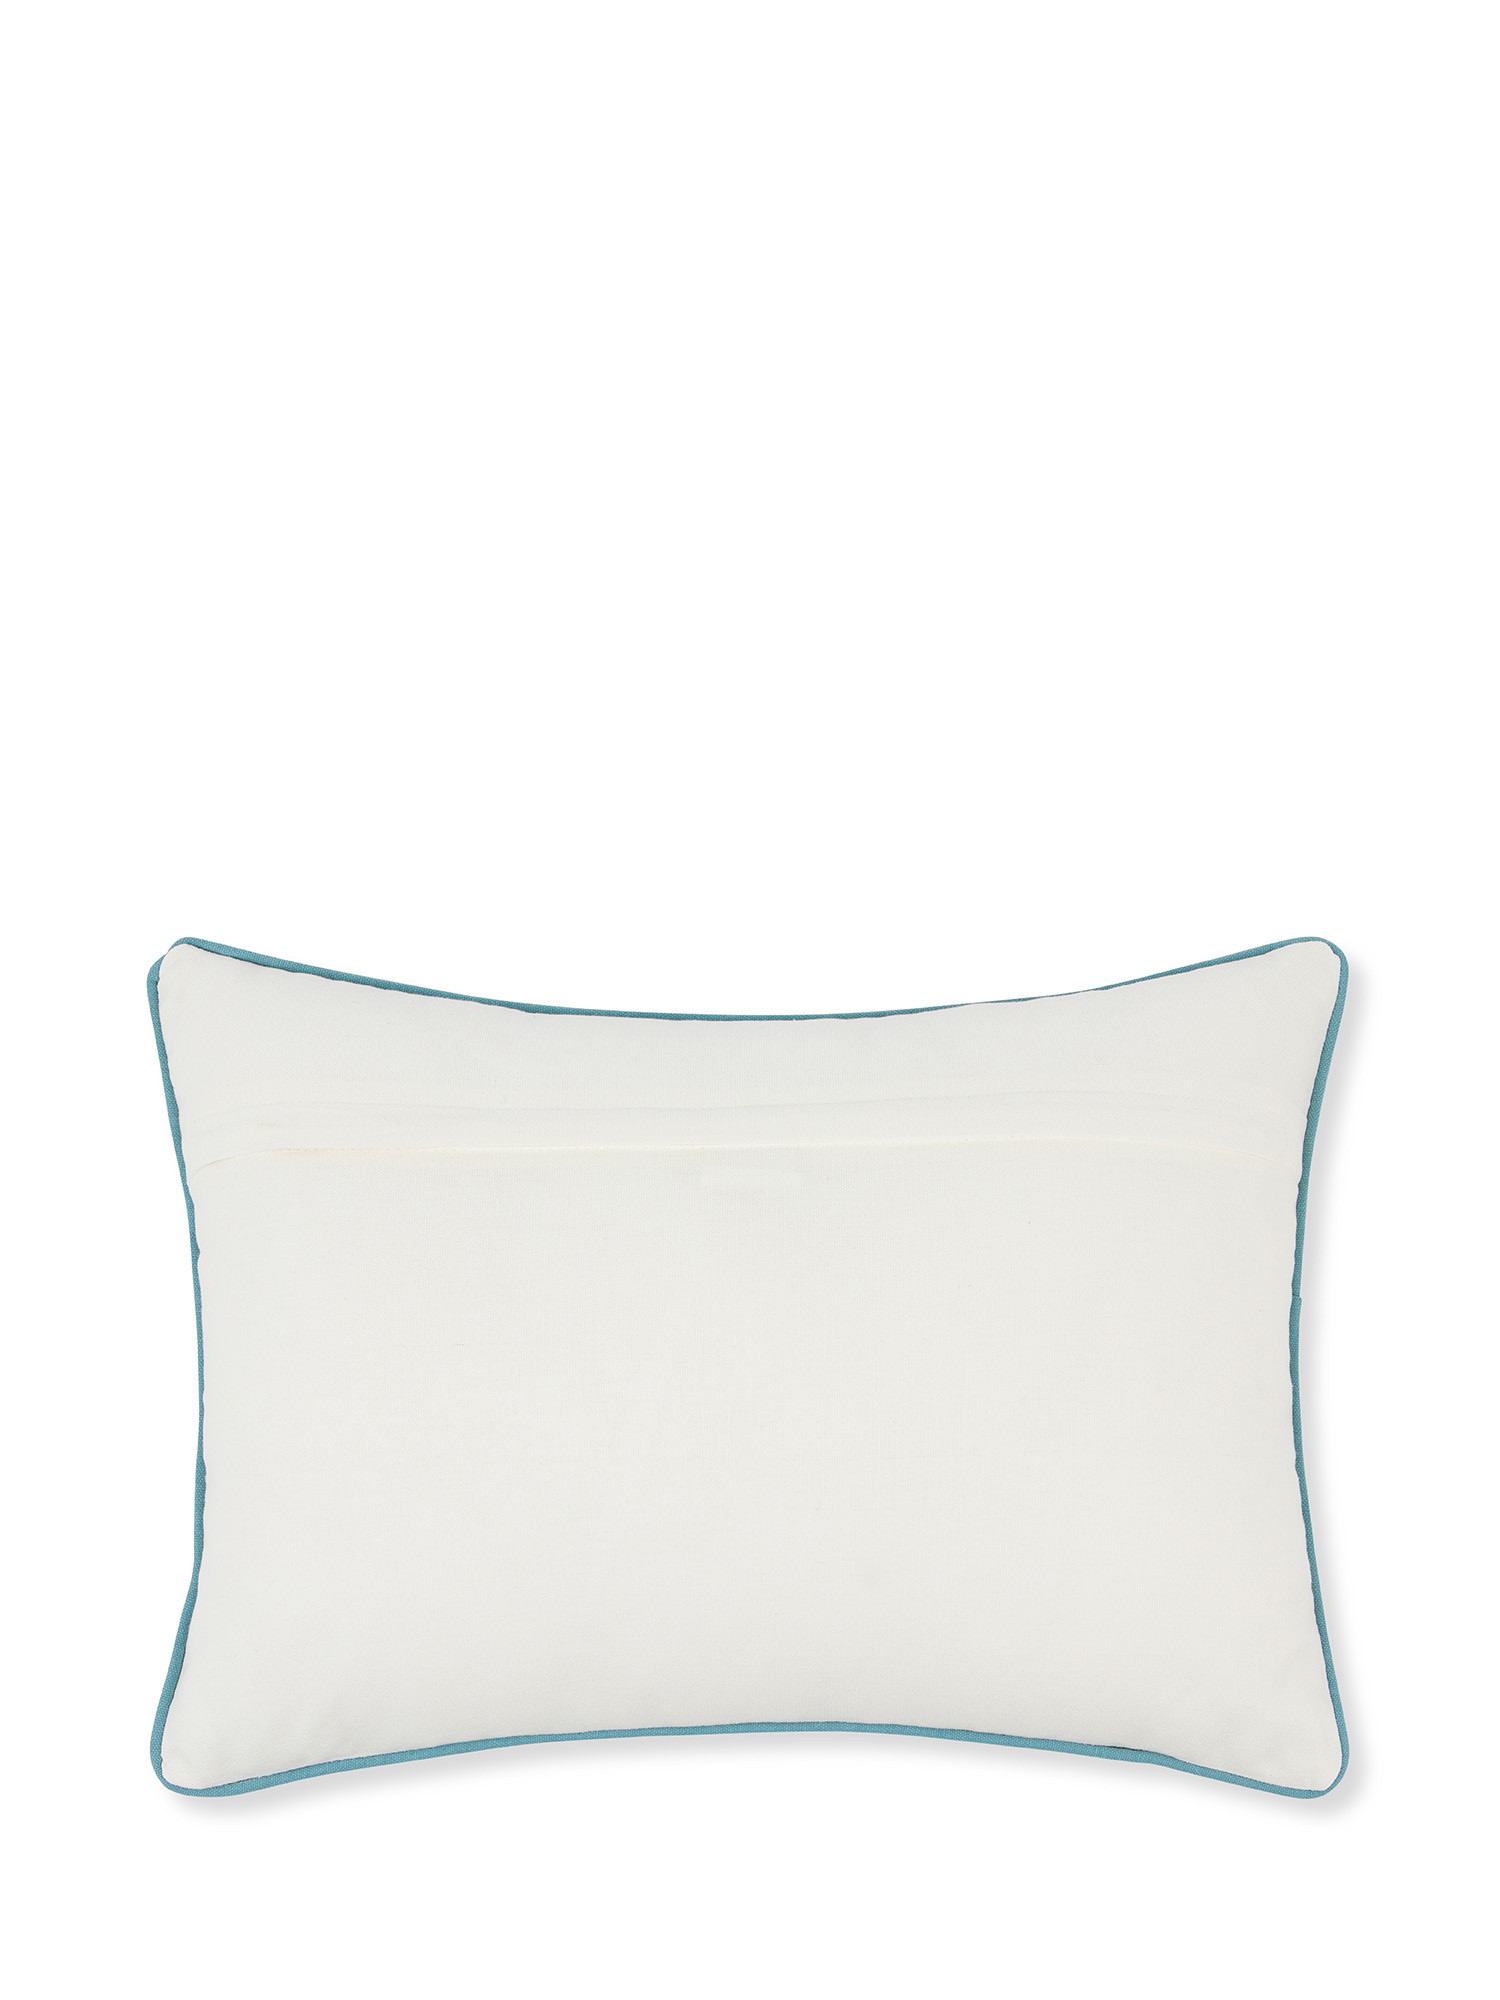 Embroidered cushion with flowers motif 35x50cm, Light Blue, large image number 1